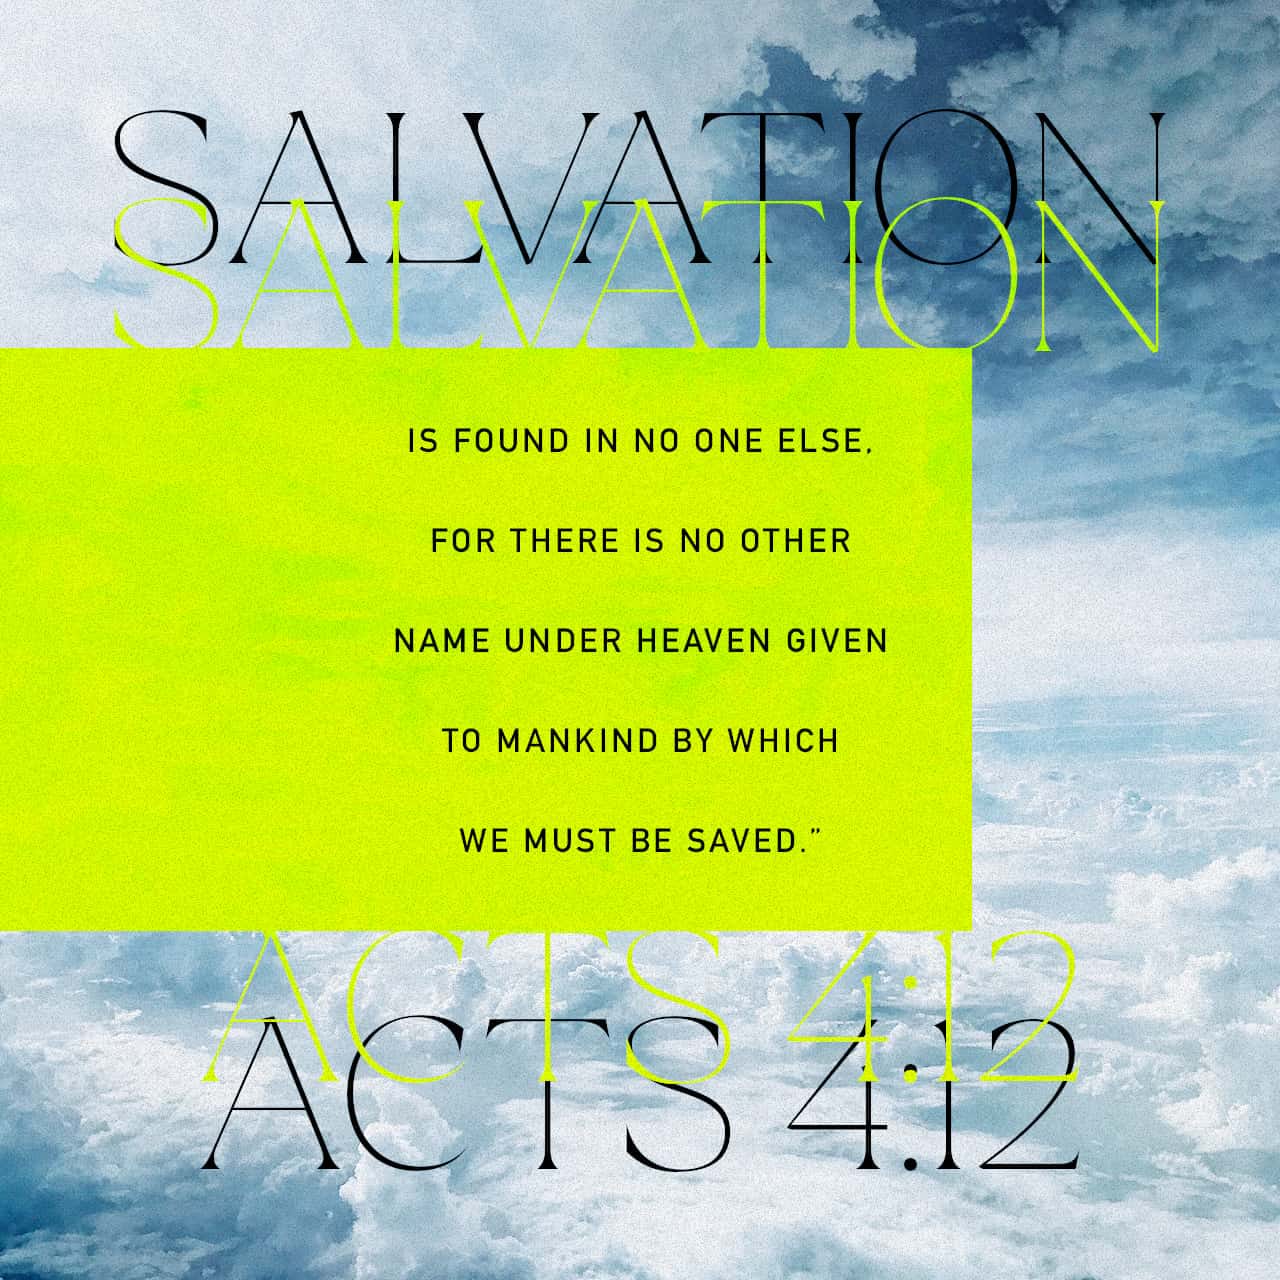 Acts 4 12 There Is Salvation In No One Else God Has Given No Other Name Under Heaven By Which We Must Be Saved And There Is Salvation In No One Else For